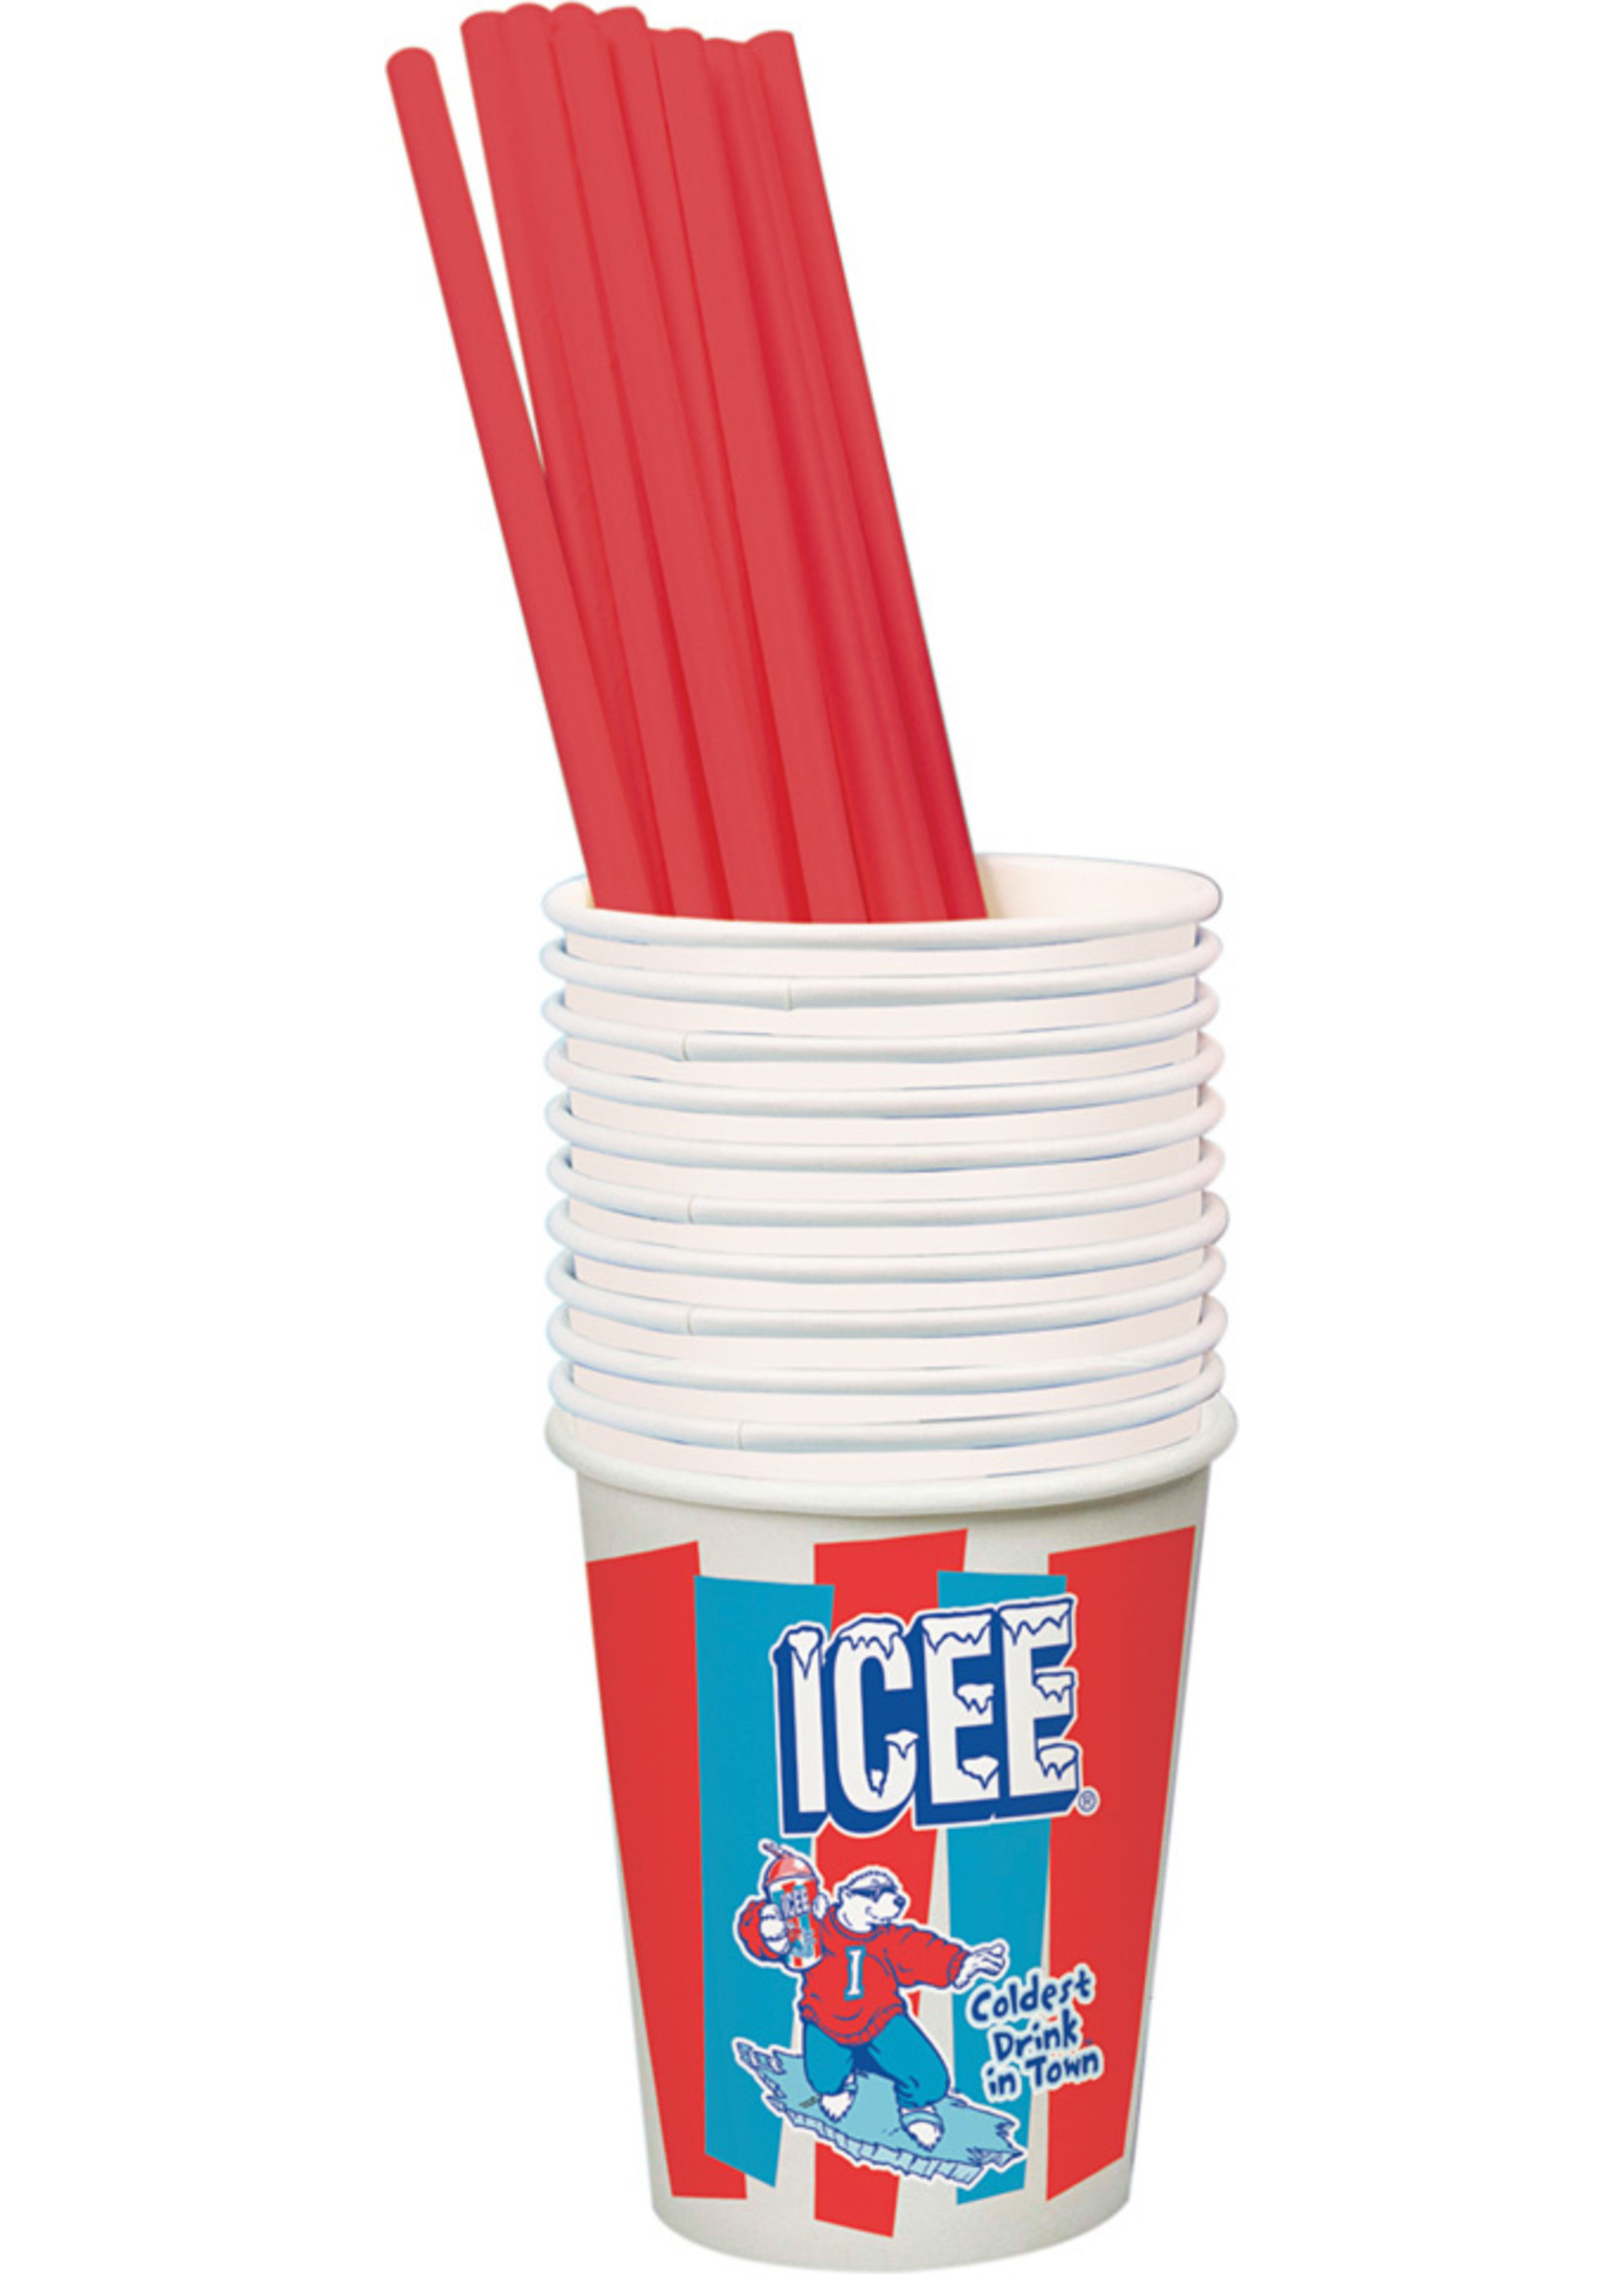 Iscream ICEE Cup and Straws